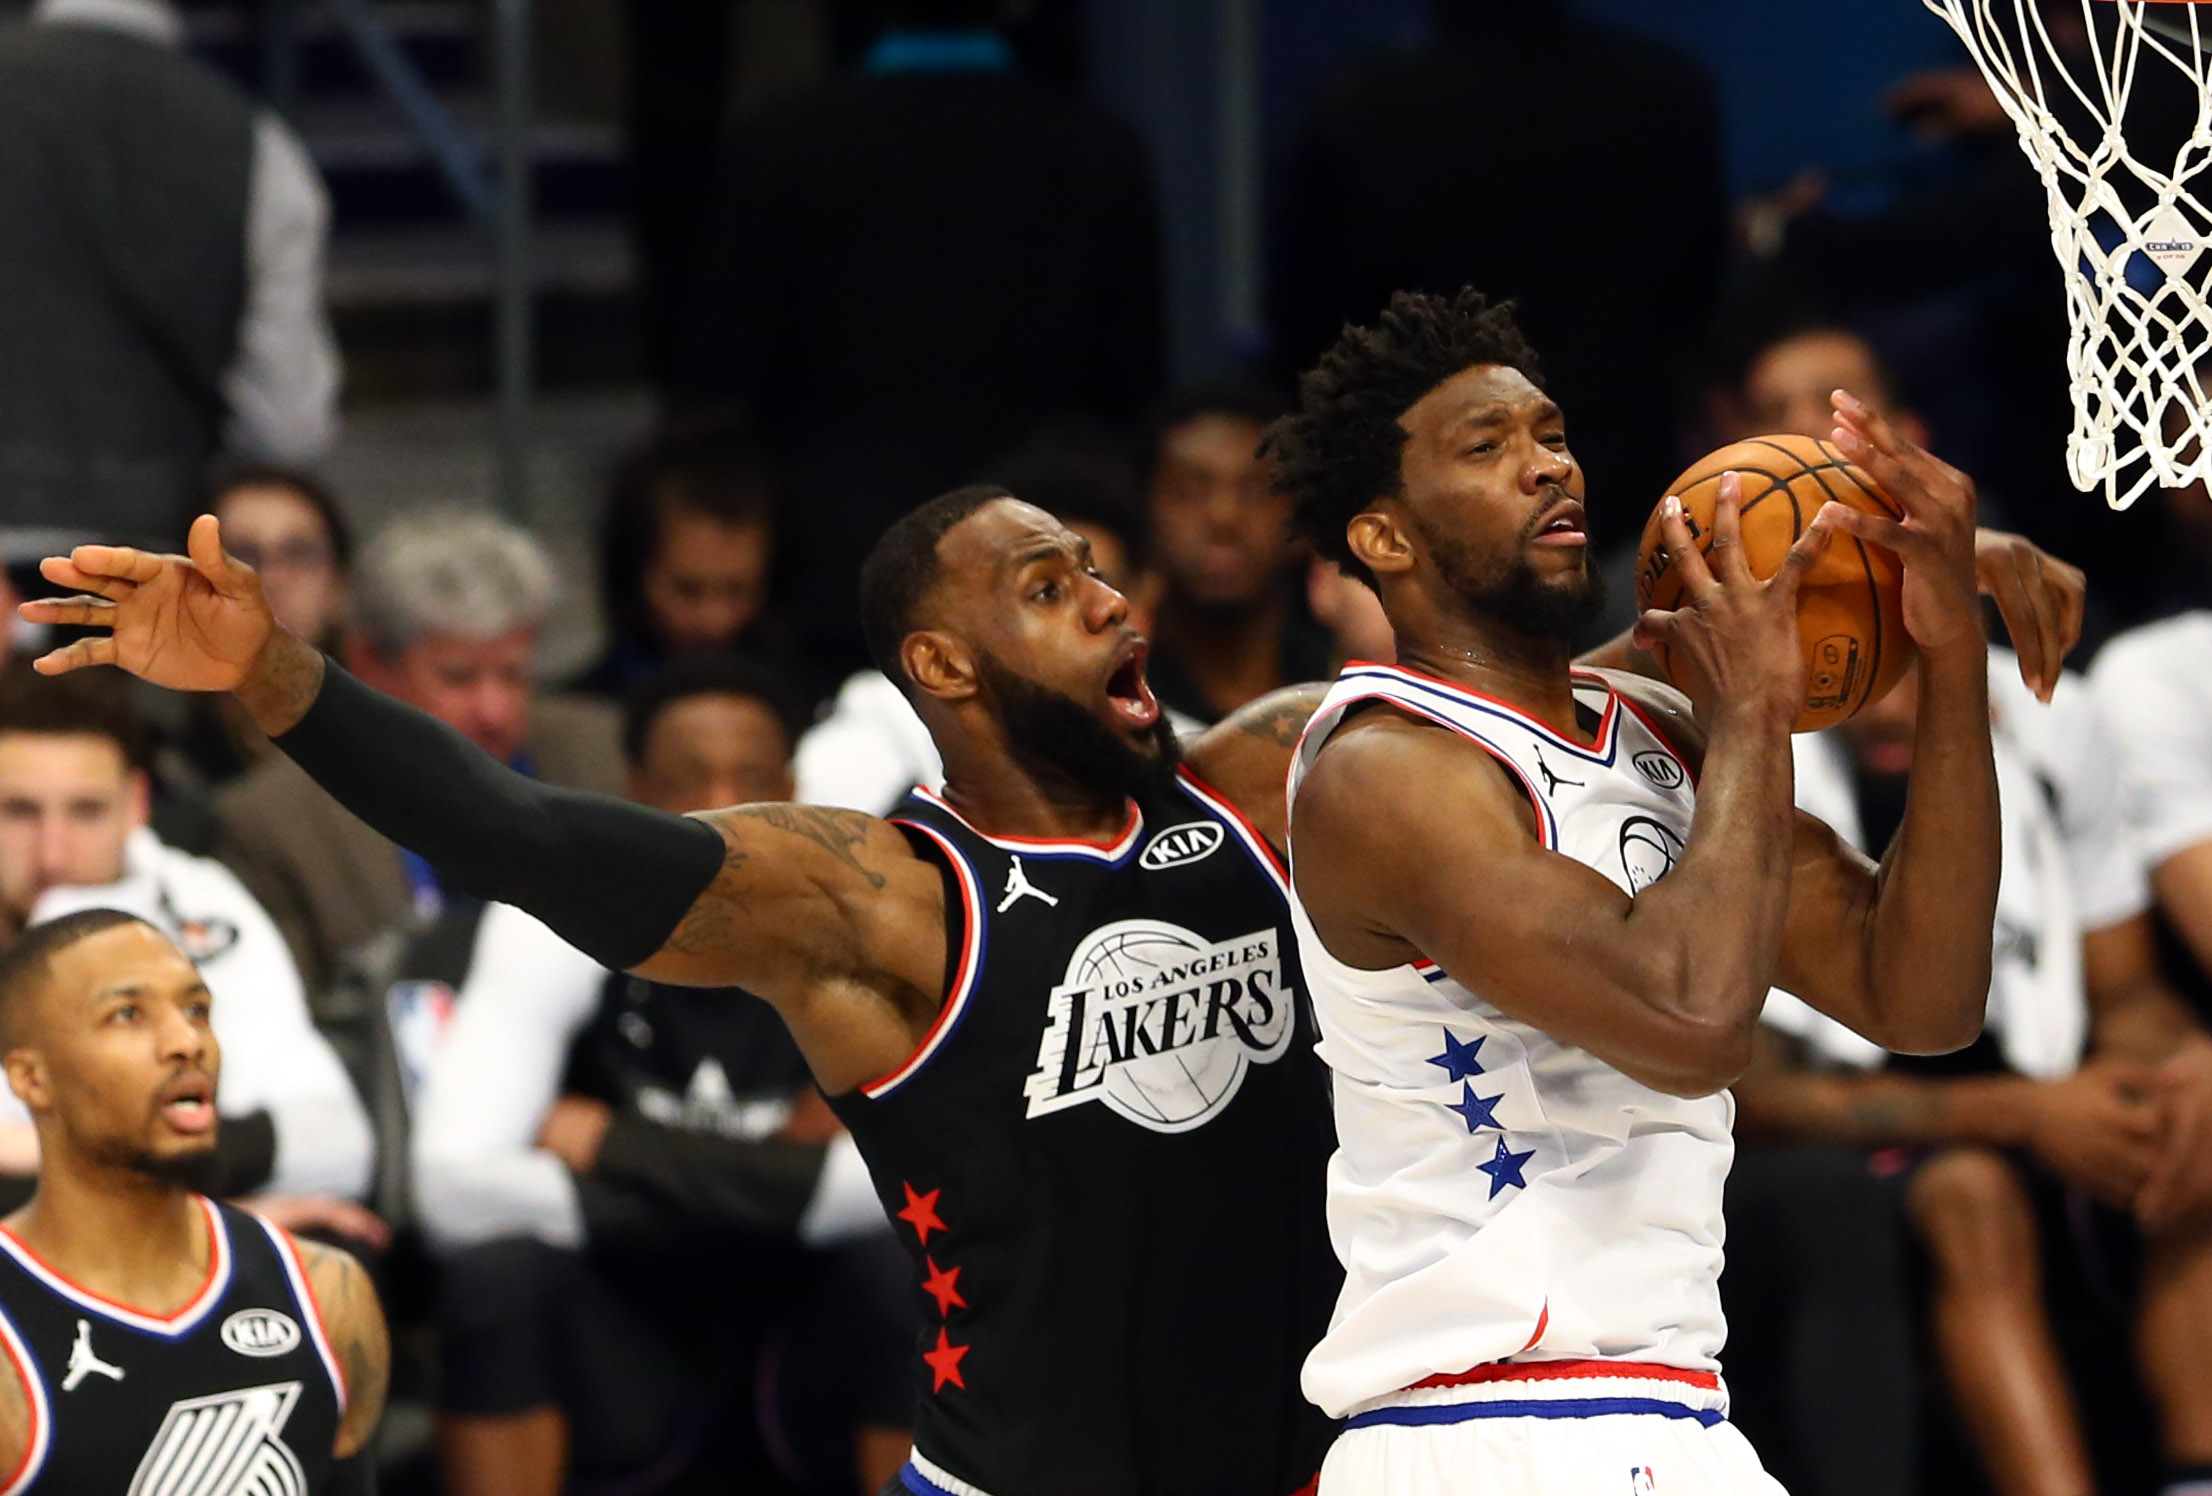 Sixers' under-the-radar move that has potential to shape Joel Embiid era